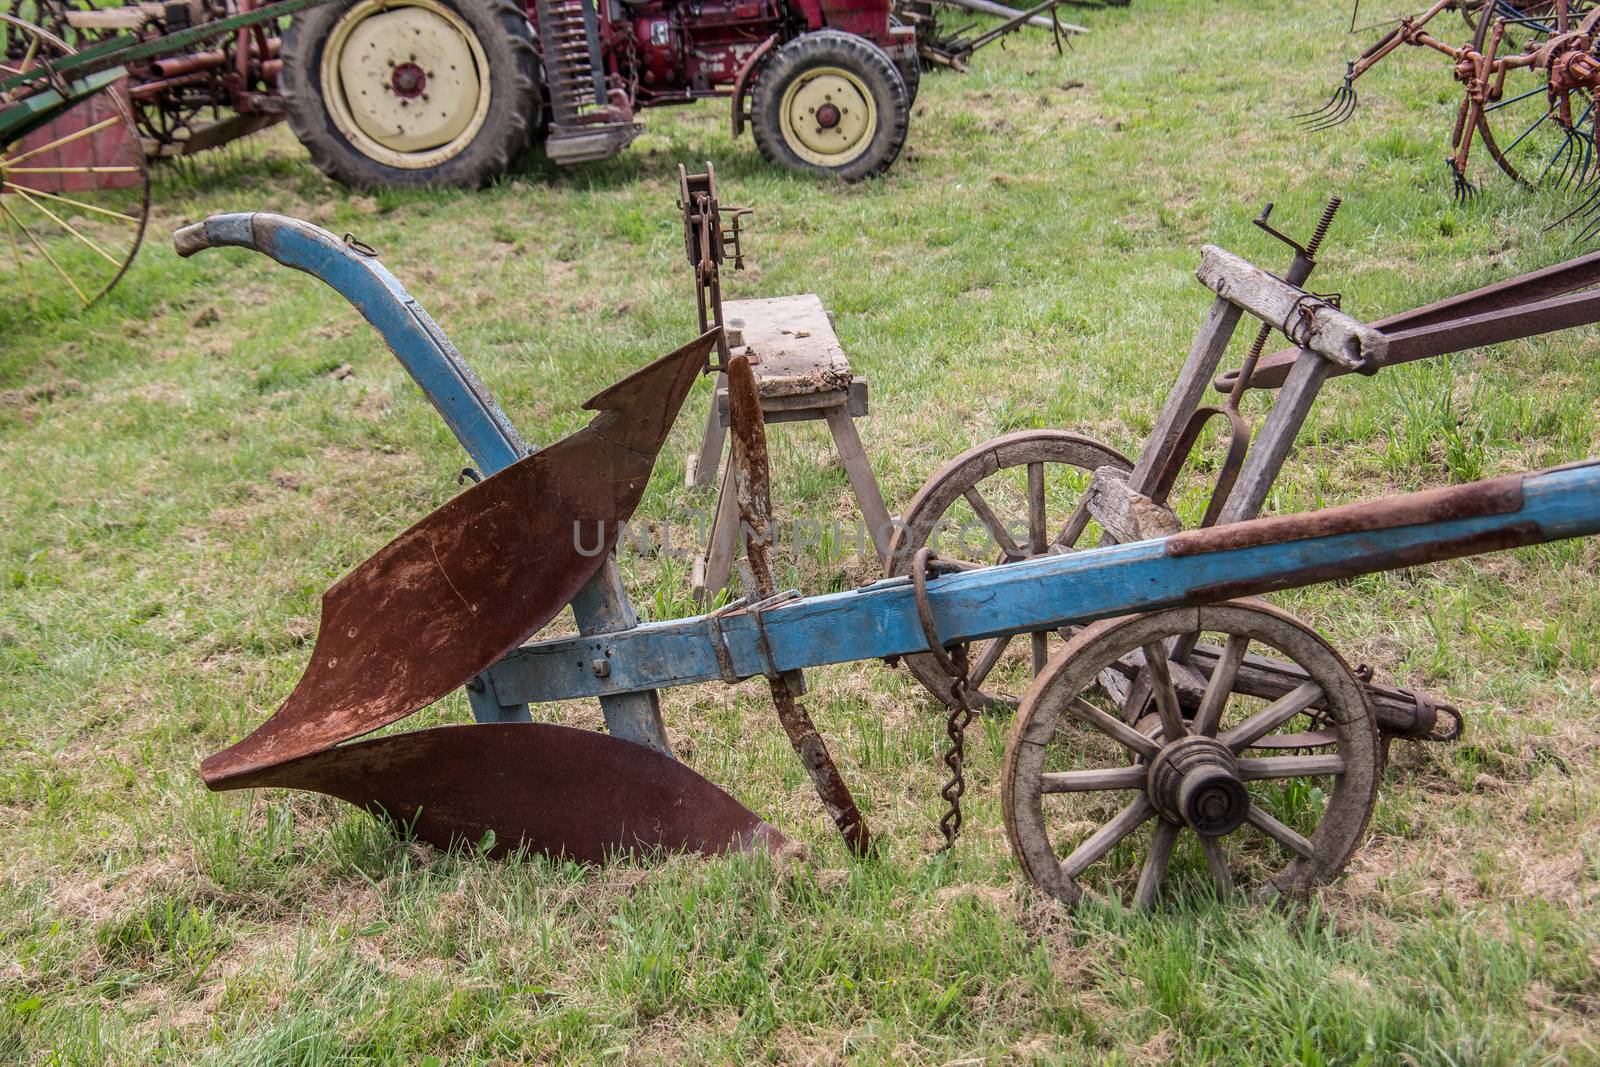 Historic agricultural machinery on the field